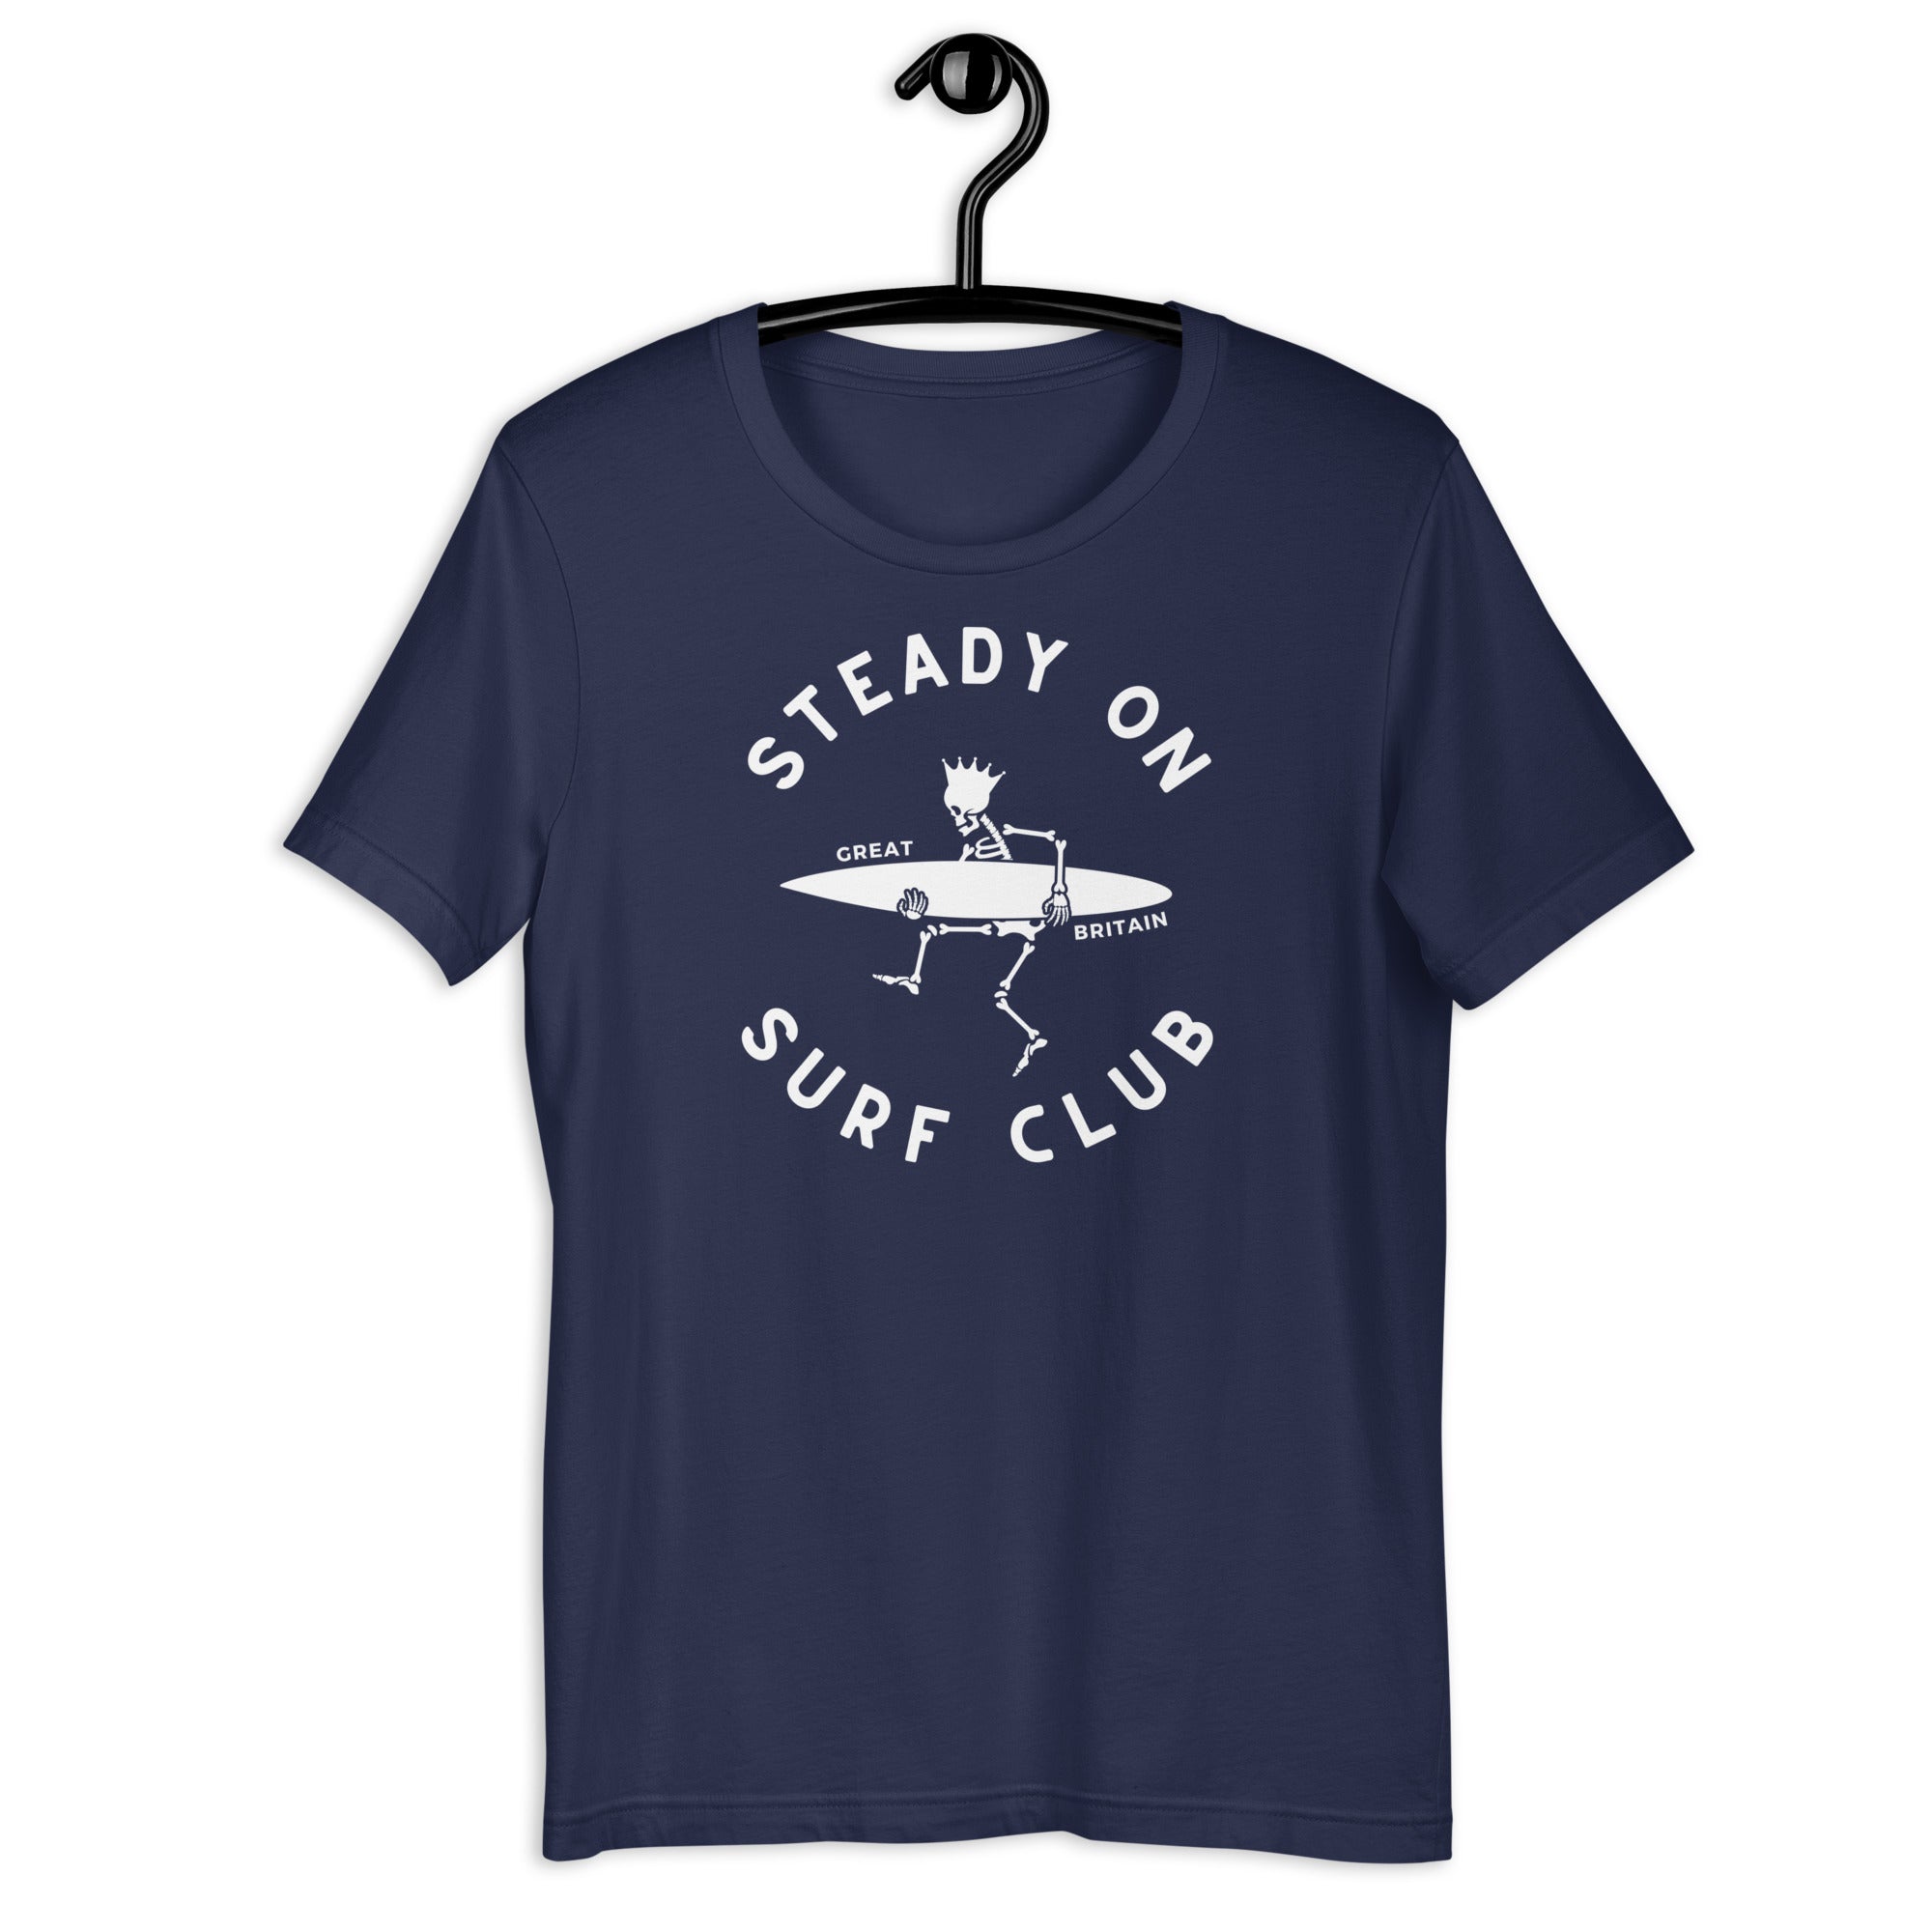 Steady On Surf Club Great Britain | Skeleton Surf King T-shirt